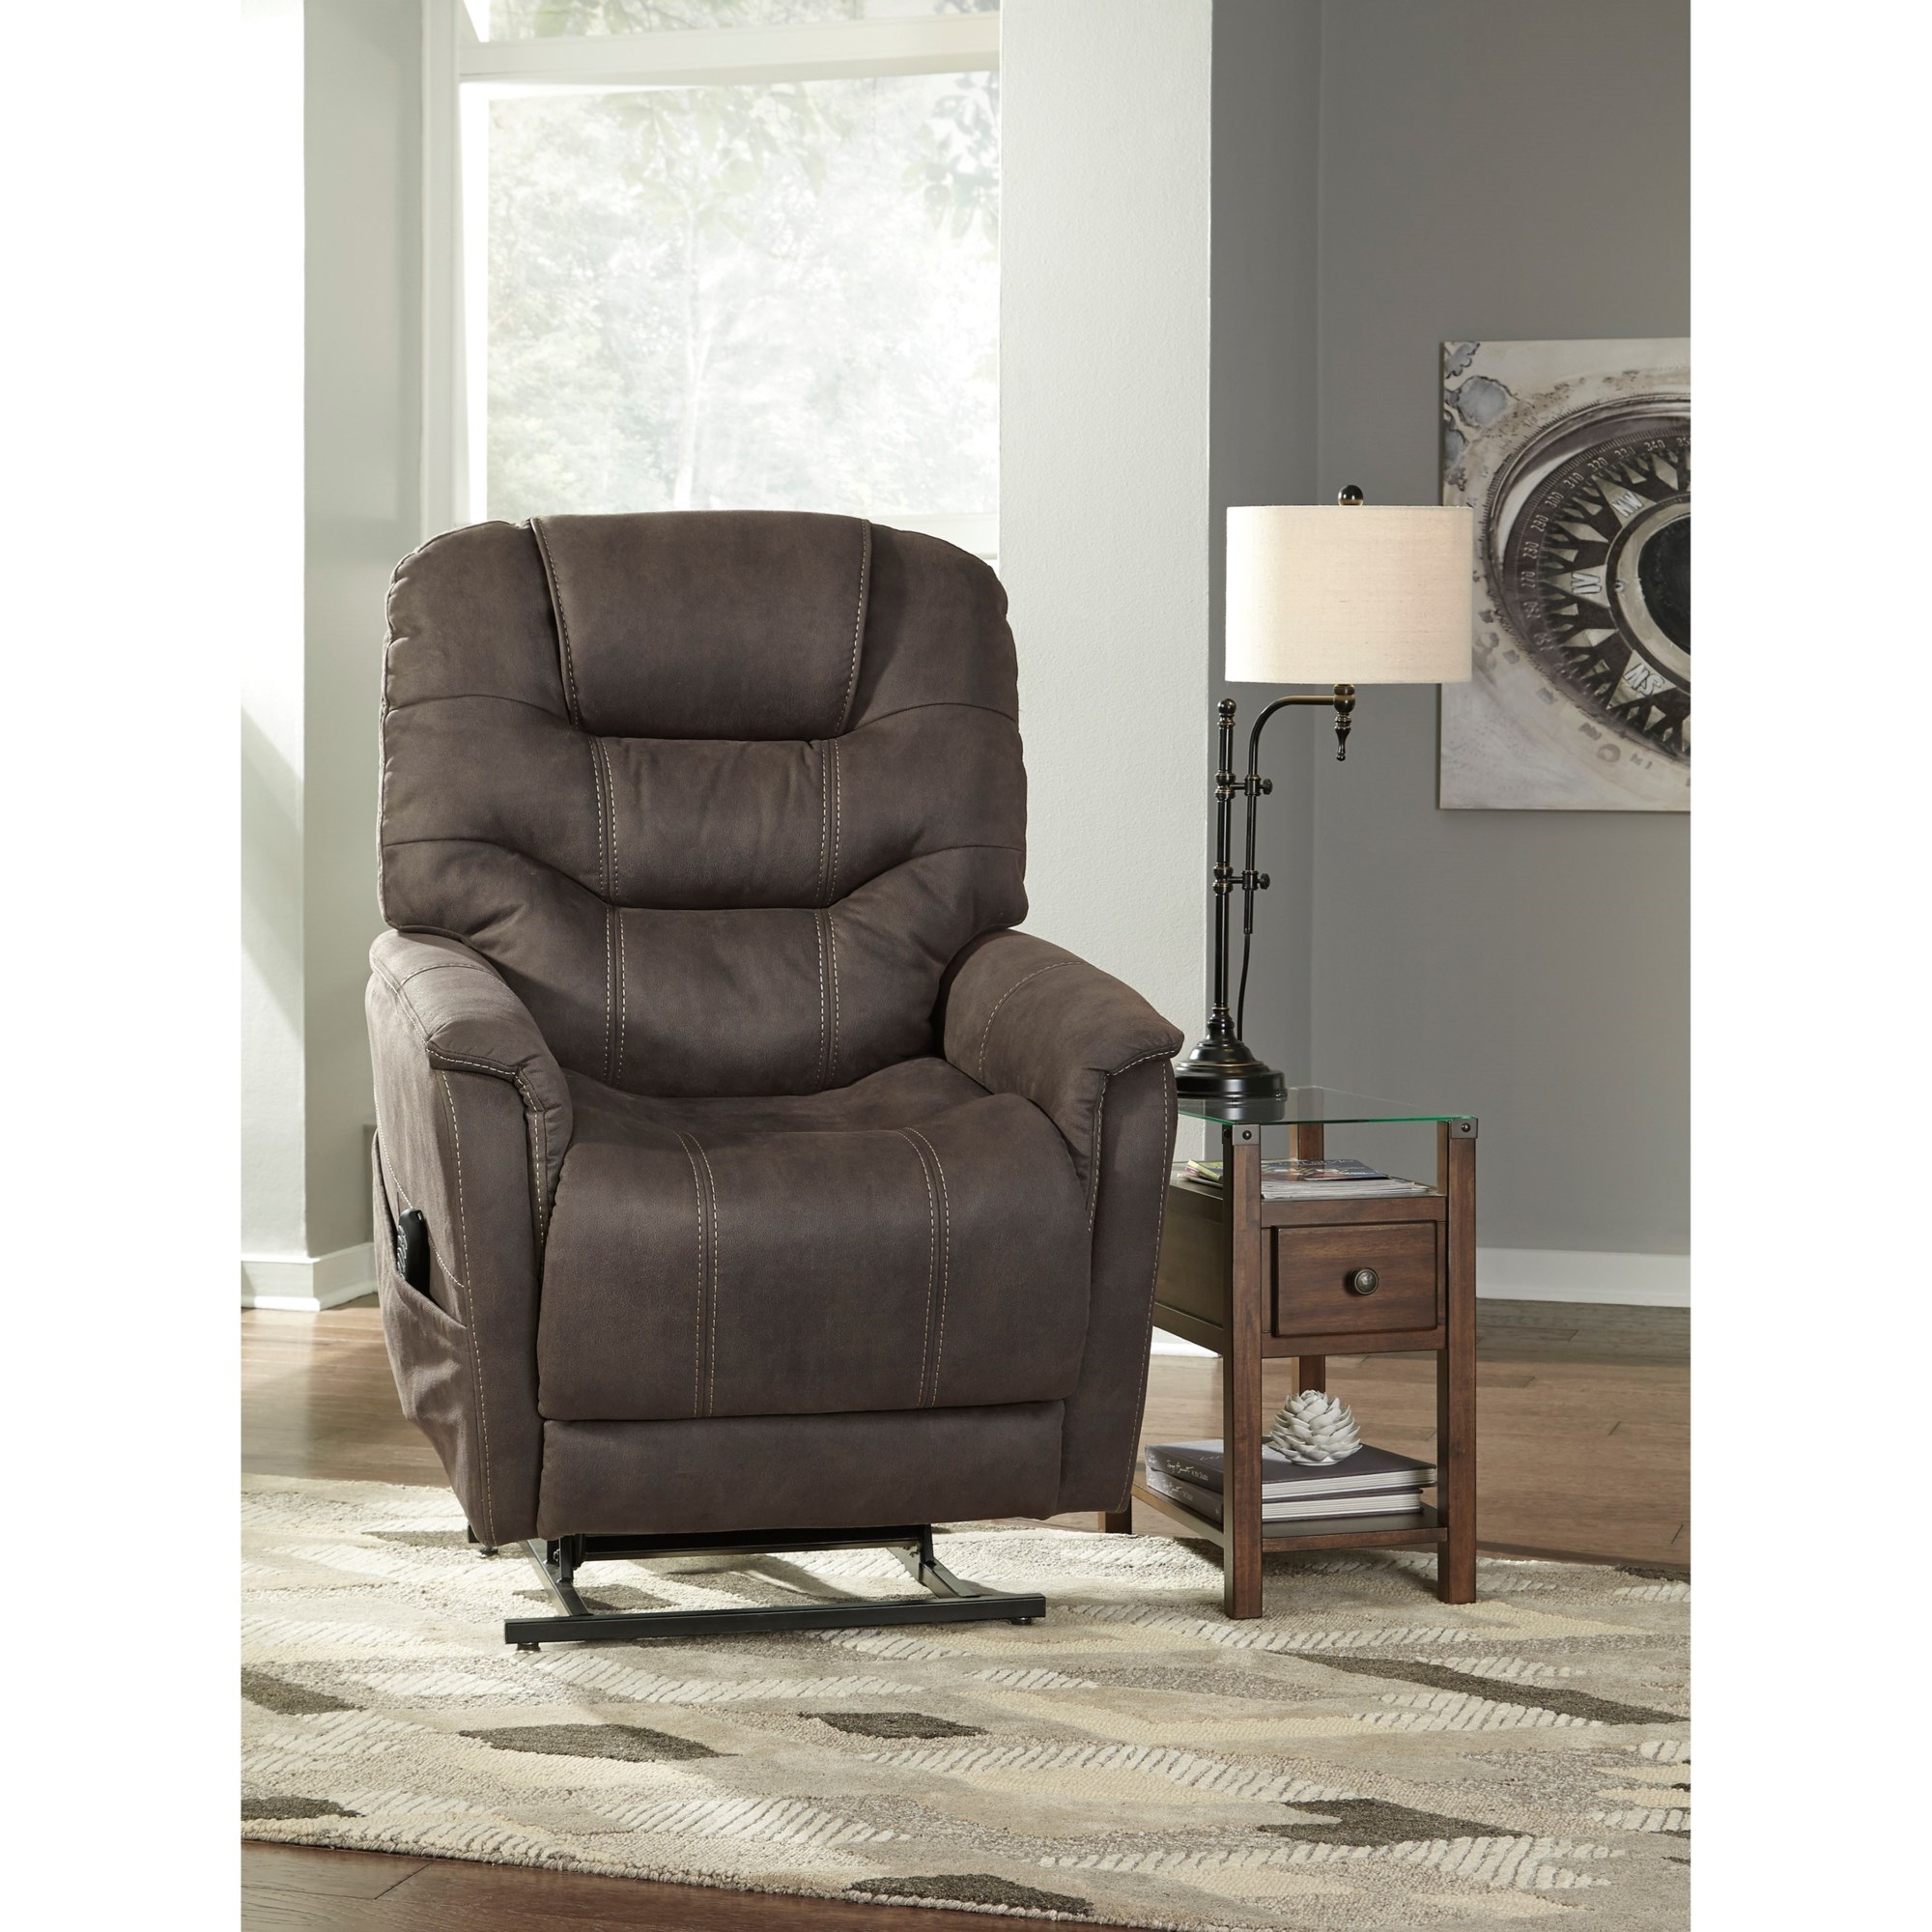 Signature Design by Ashley Ballister 21604-12 Power Lift Recliner with  Power Adjustable Lumbar and Headrest, Furniture and ApplianceMart